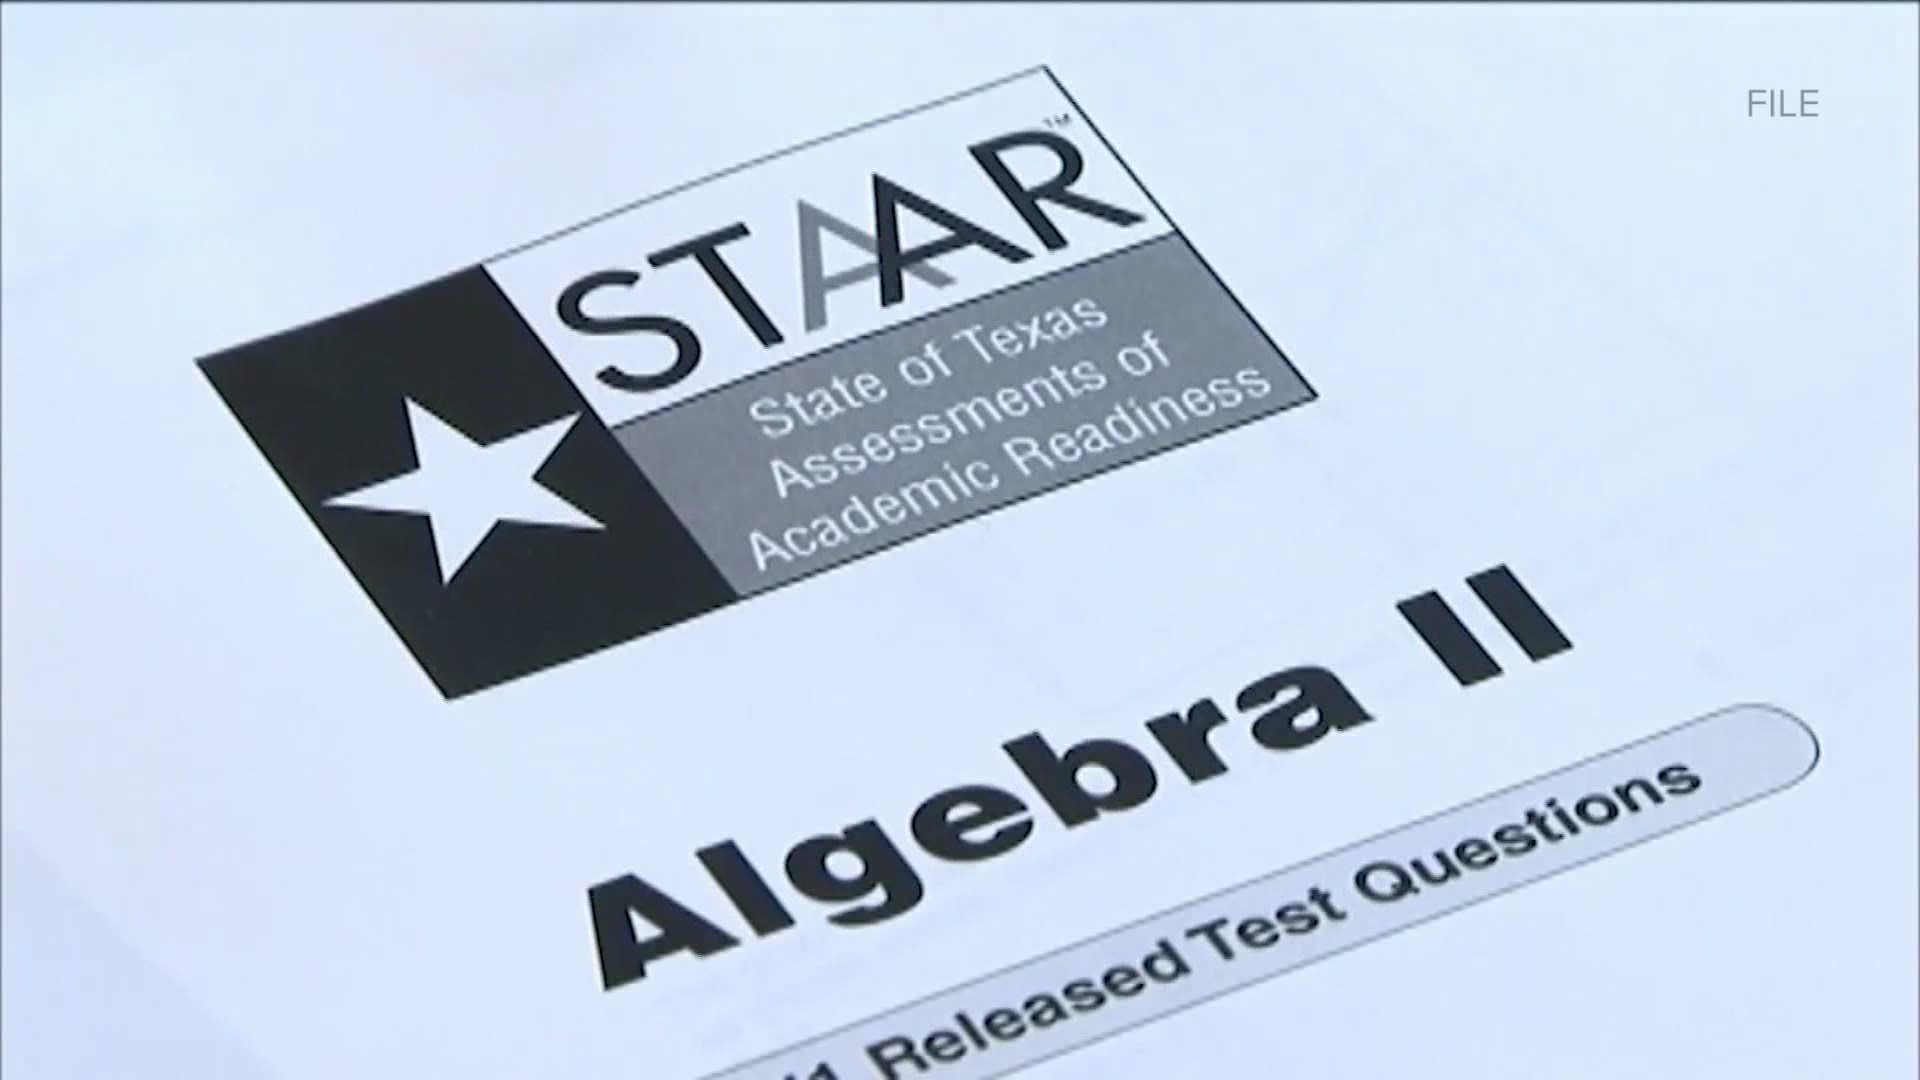 This school year, the STAAR tests are being administered on paper, online or a combination of the two.